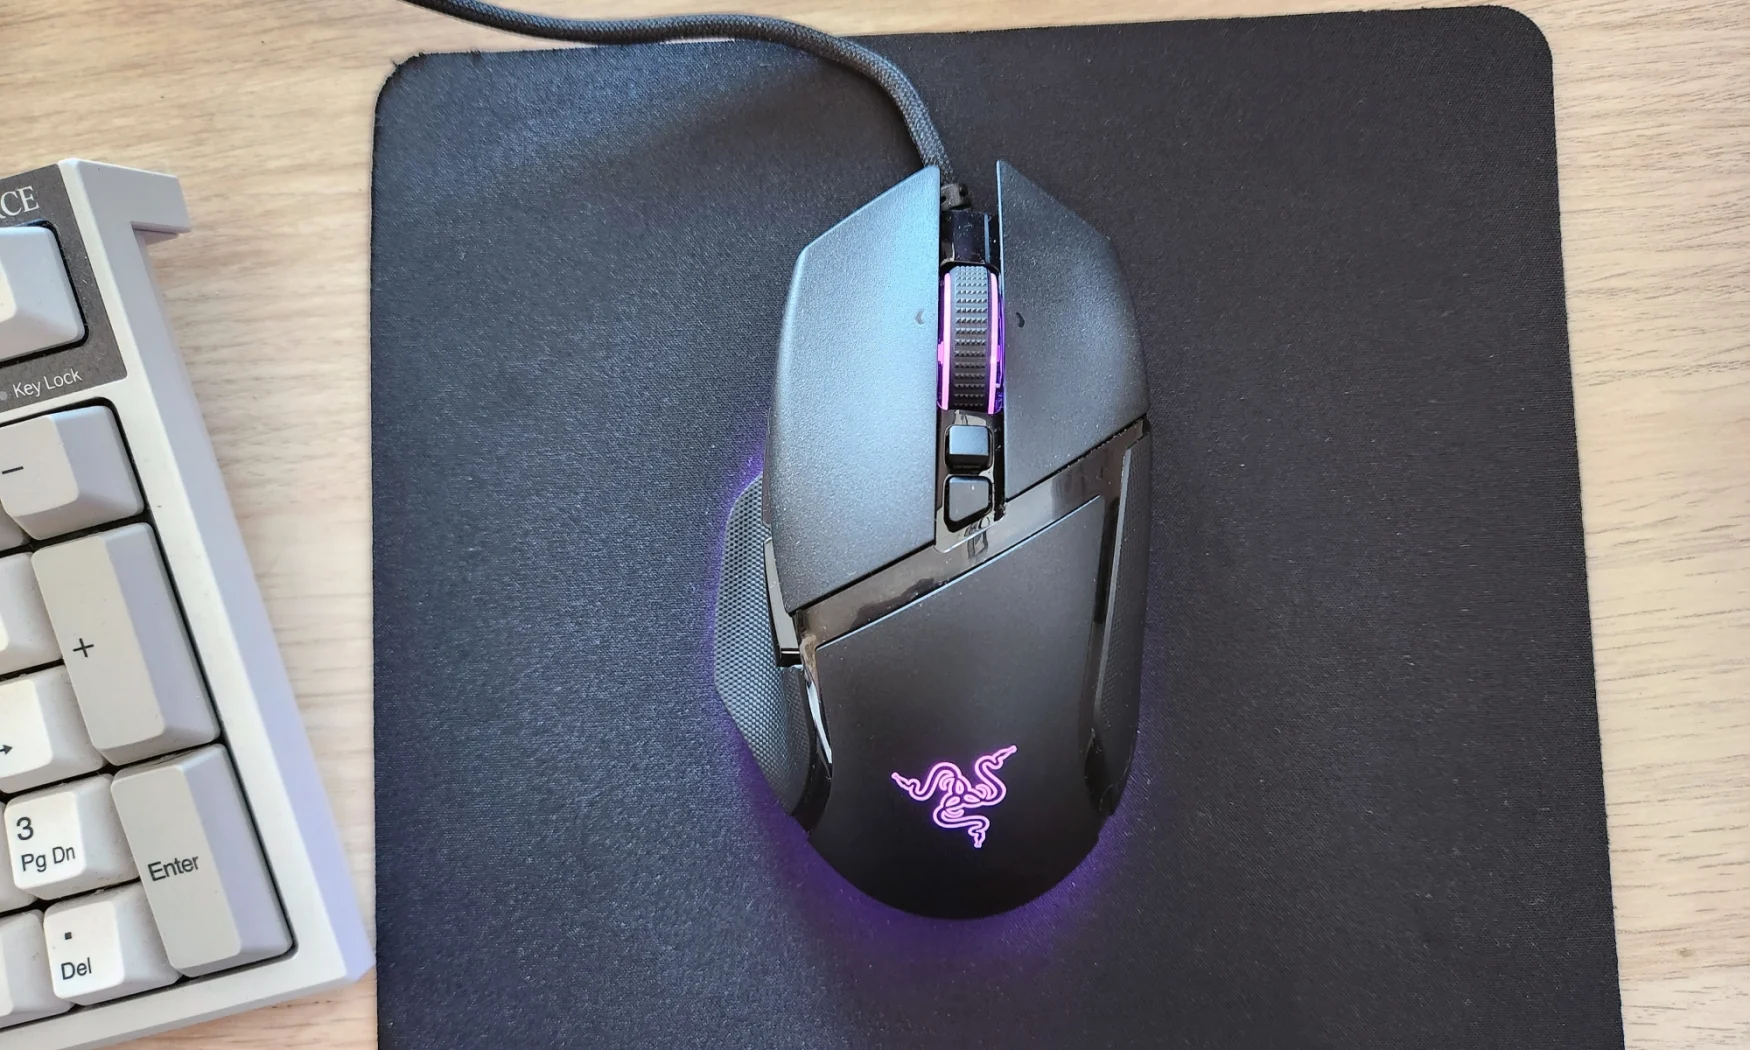 The Razer Basilisk V3 gaming mouse rested on a black mouse pad, with RGB lighting emitting from its logo, scroll wheel and underside.